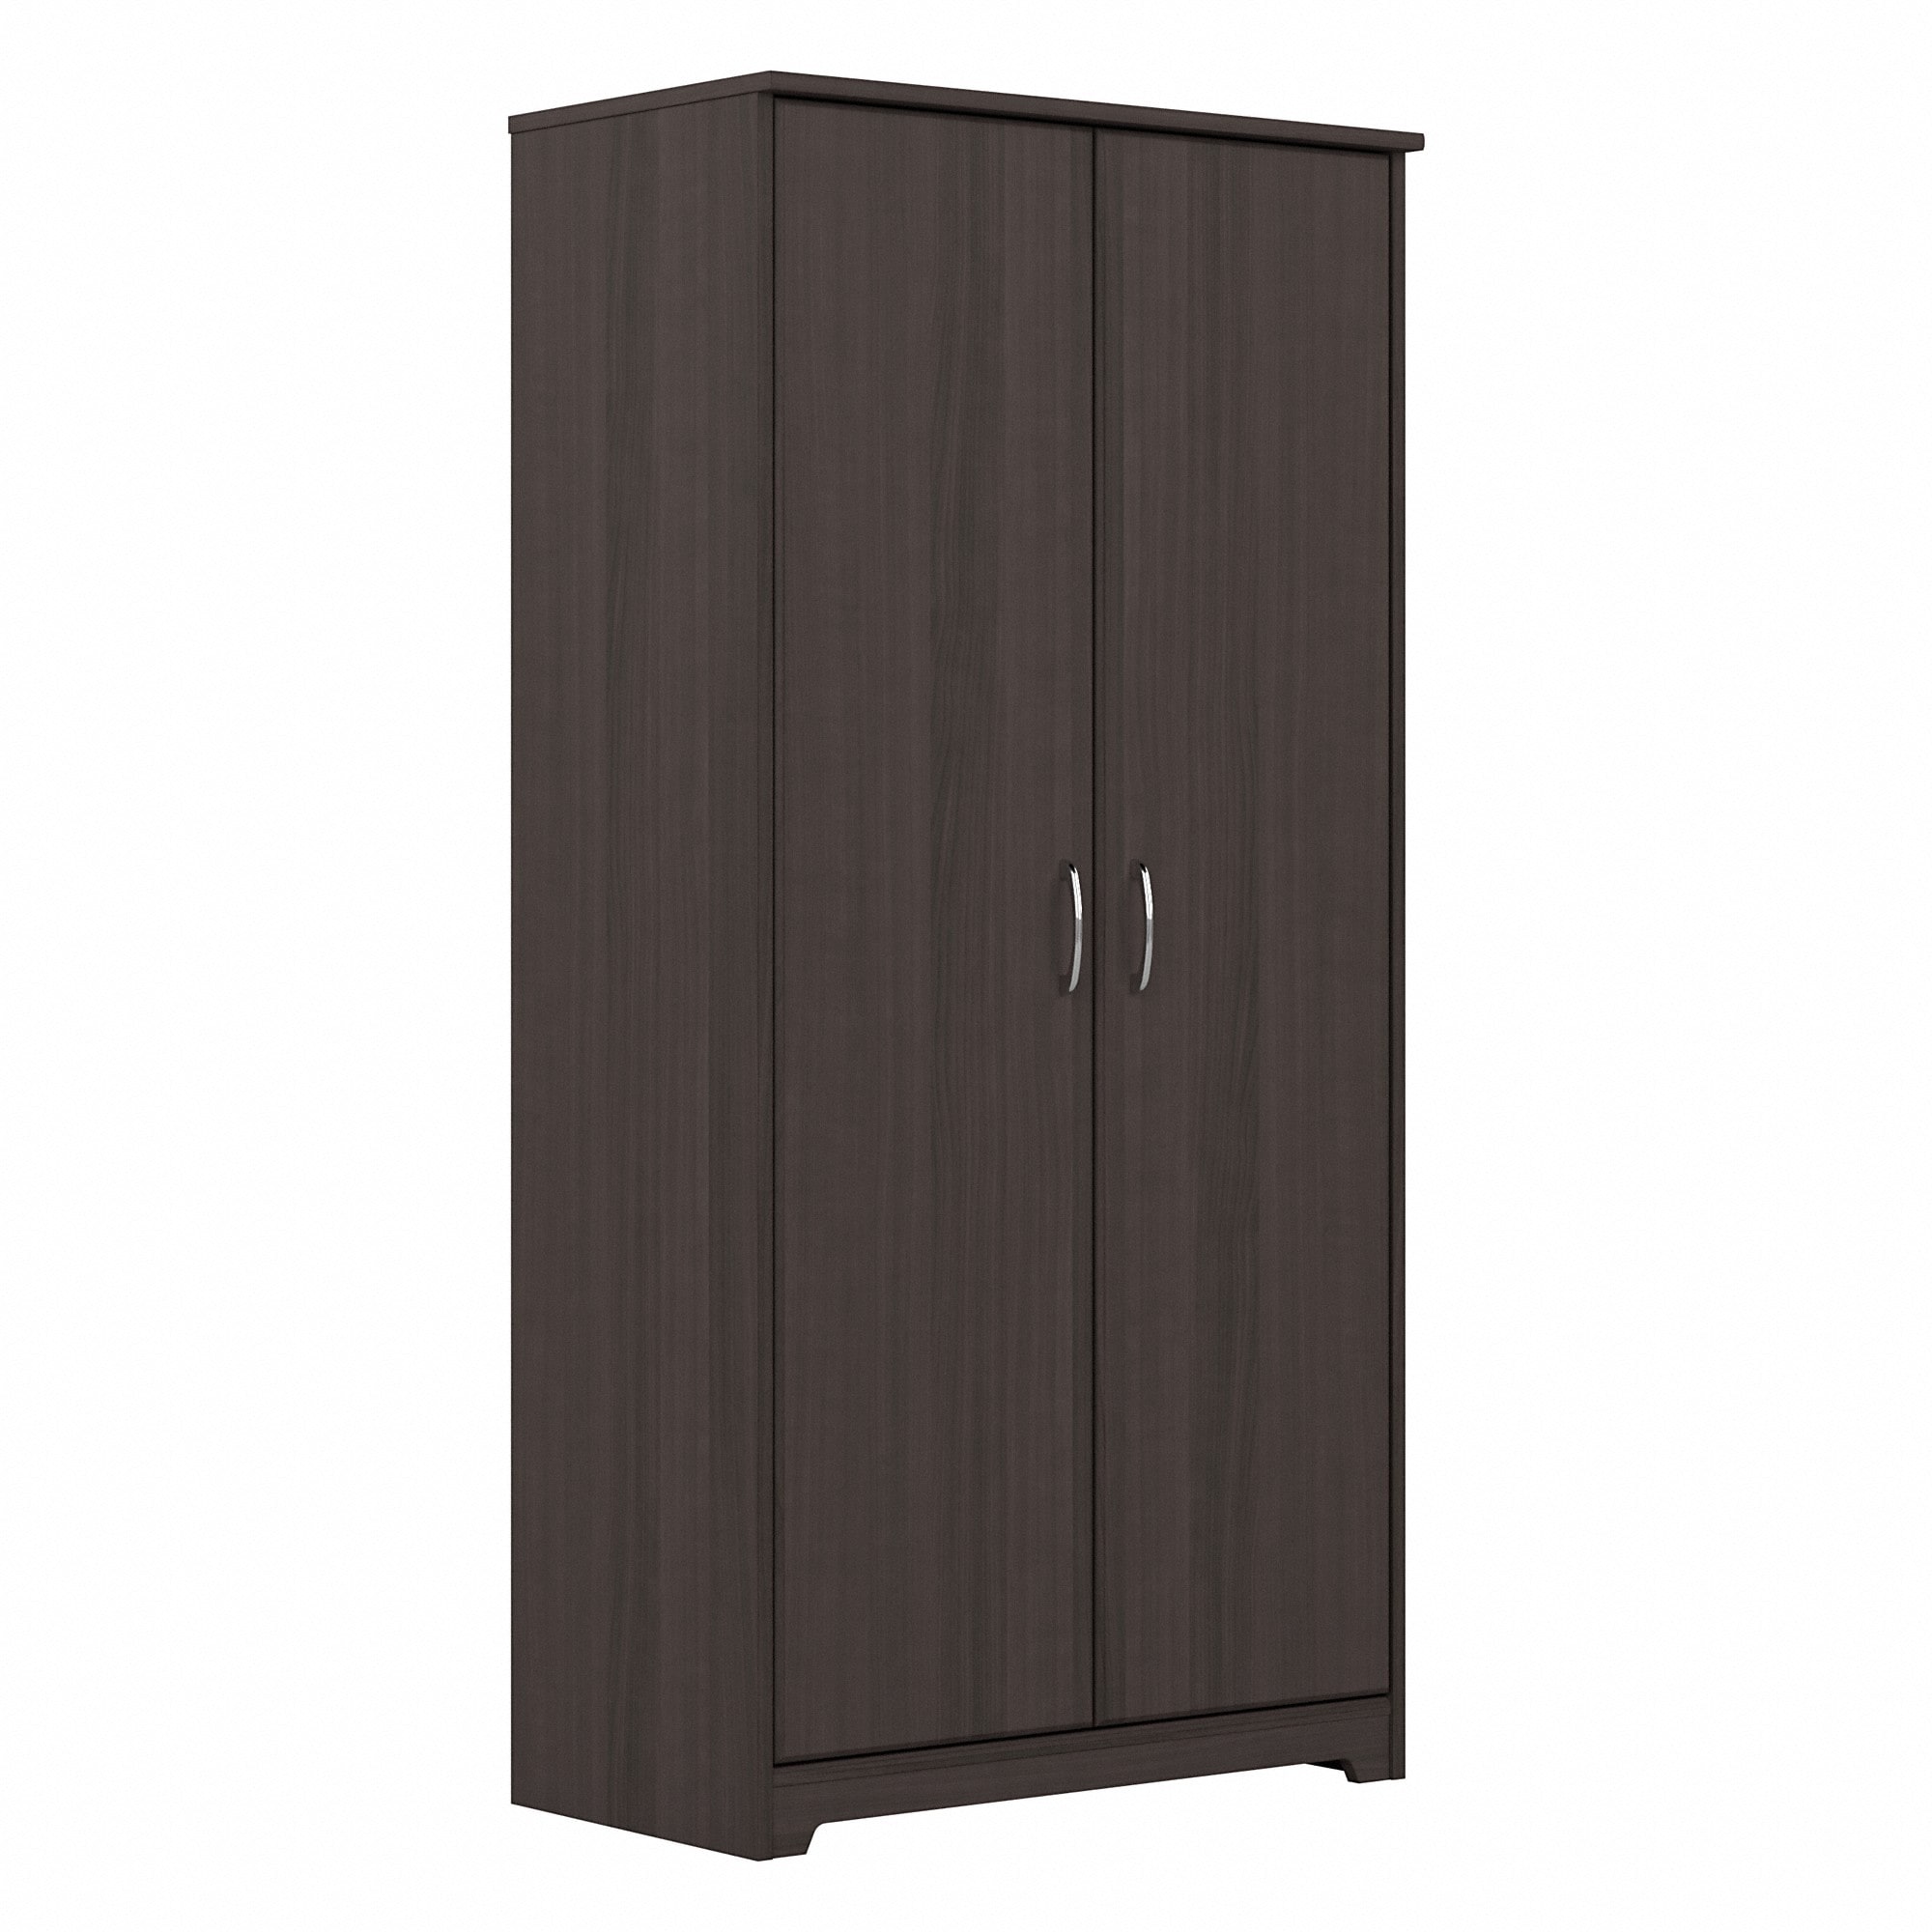 https://ak1.ostkcdn.com/images/products/is/images/direct/d562a4d8a25bd69b7a41636073b547230d6709b6/Cabot-Tall-Storage-Cabinet-with-Doors-by-Bush-Furniture.jpg